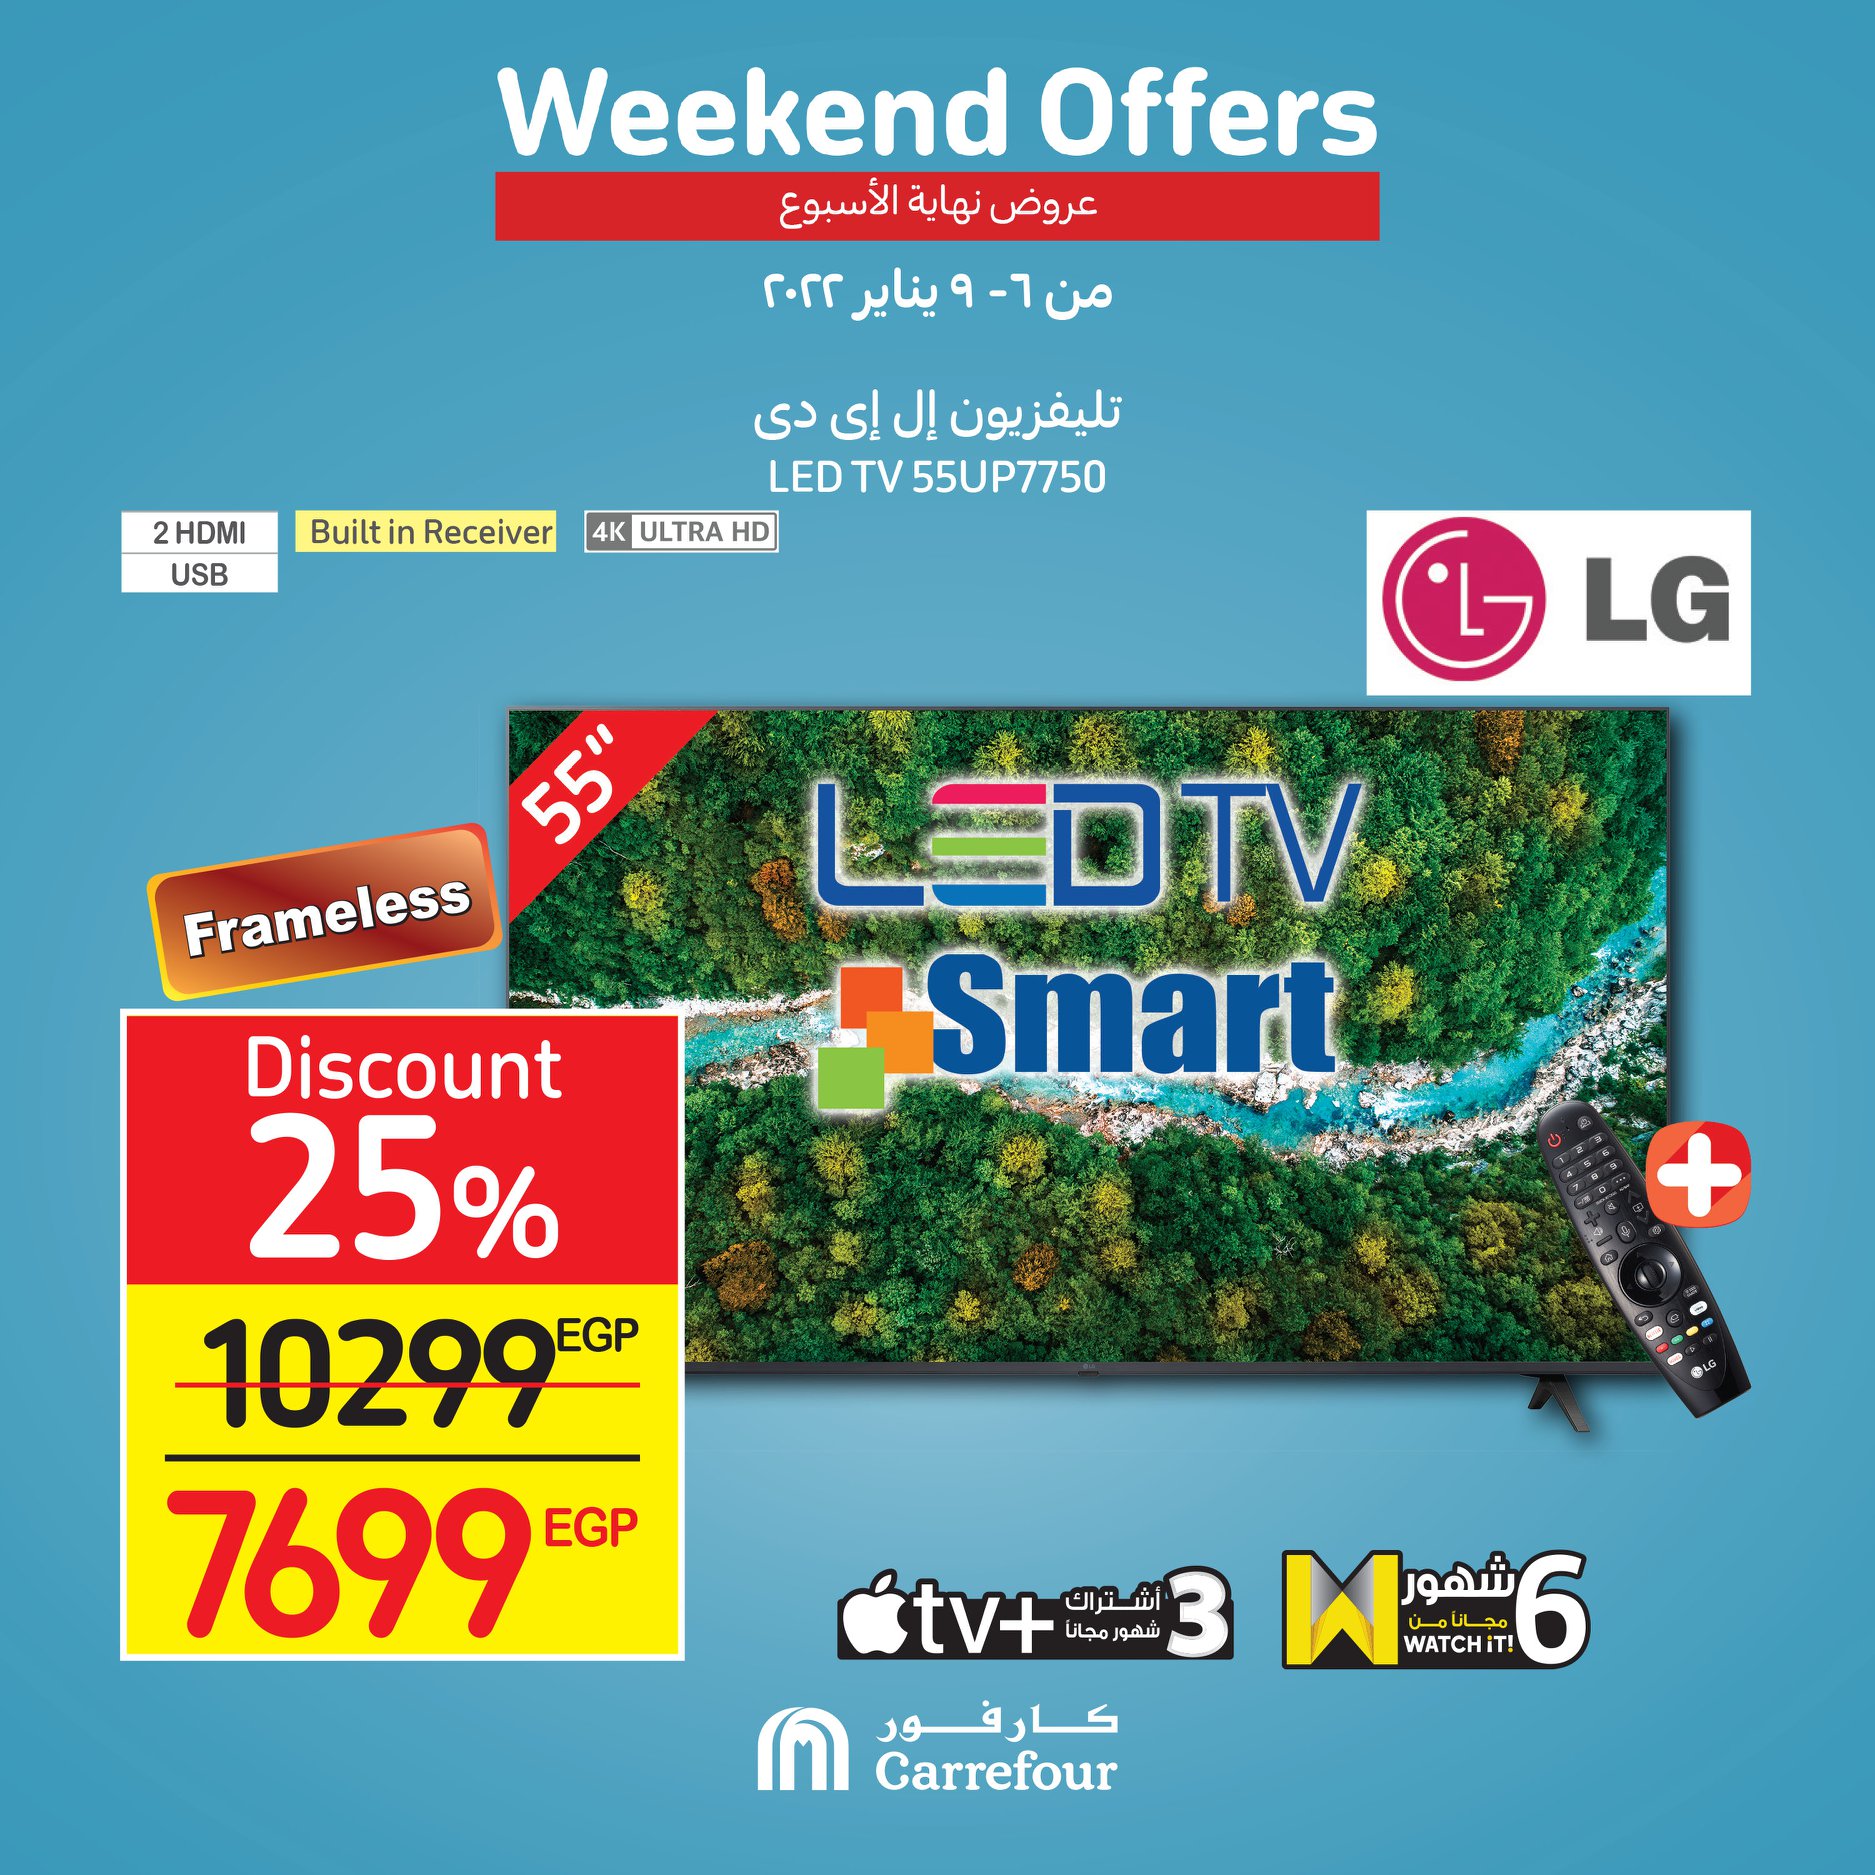 Now, the strongest offers and surprises from Carrefour, half-price discounts, at Weekend until January 16th, 8